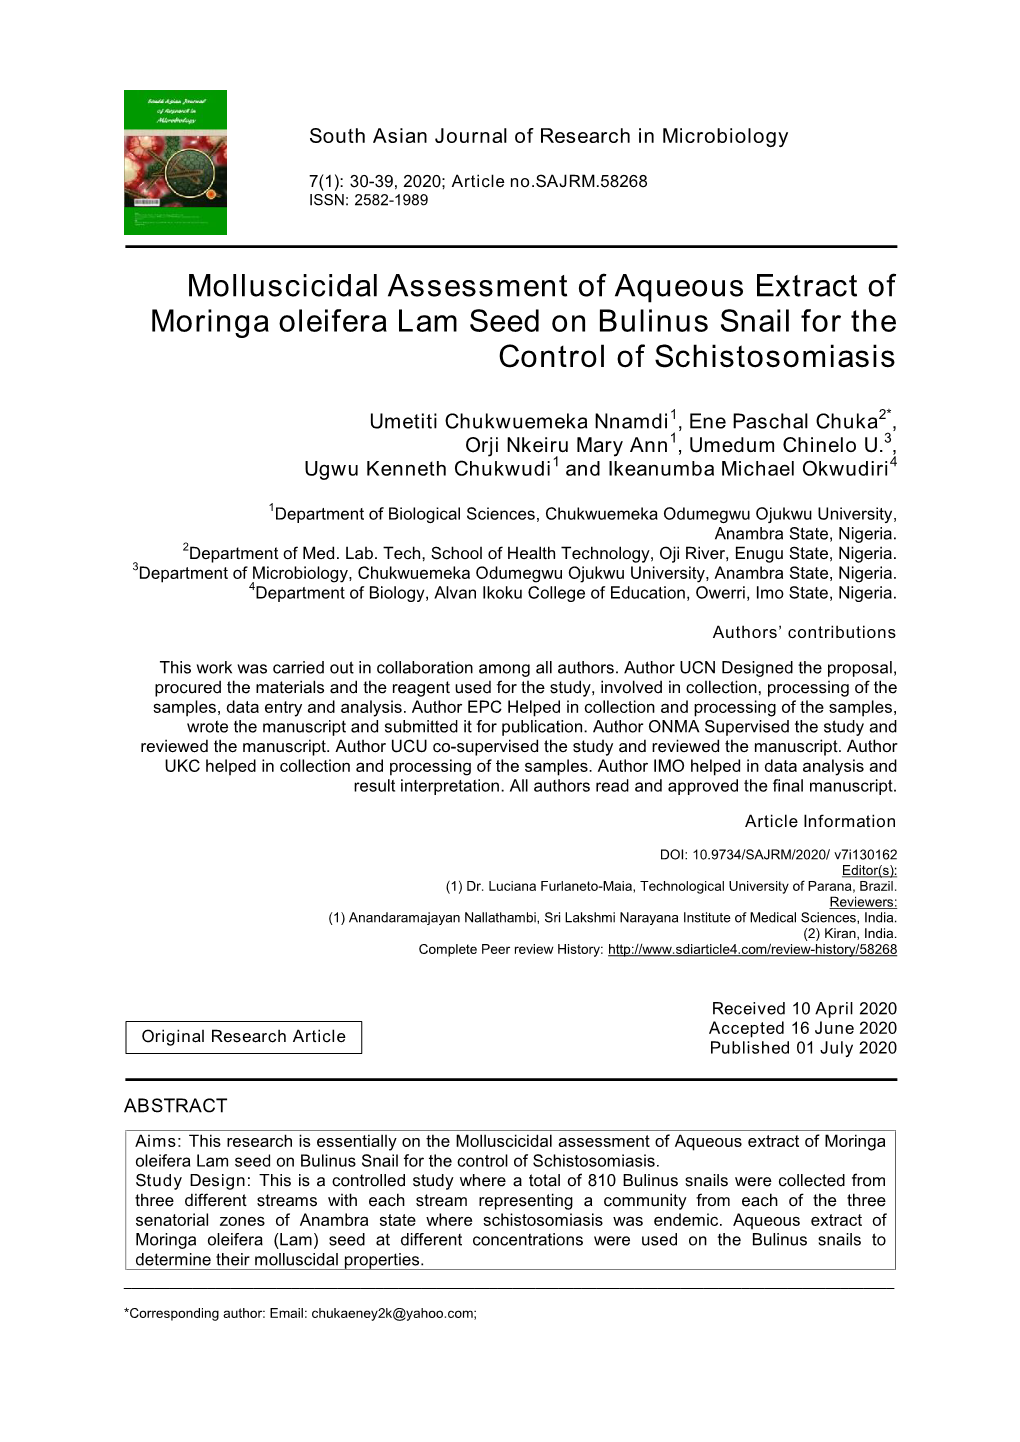 Molluscicidal Assessment of Aqueous Extract of Moringa Oleifera Lam Seed on Bulinus Snail for the Control of Schistosomiasis